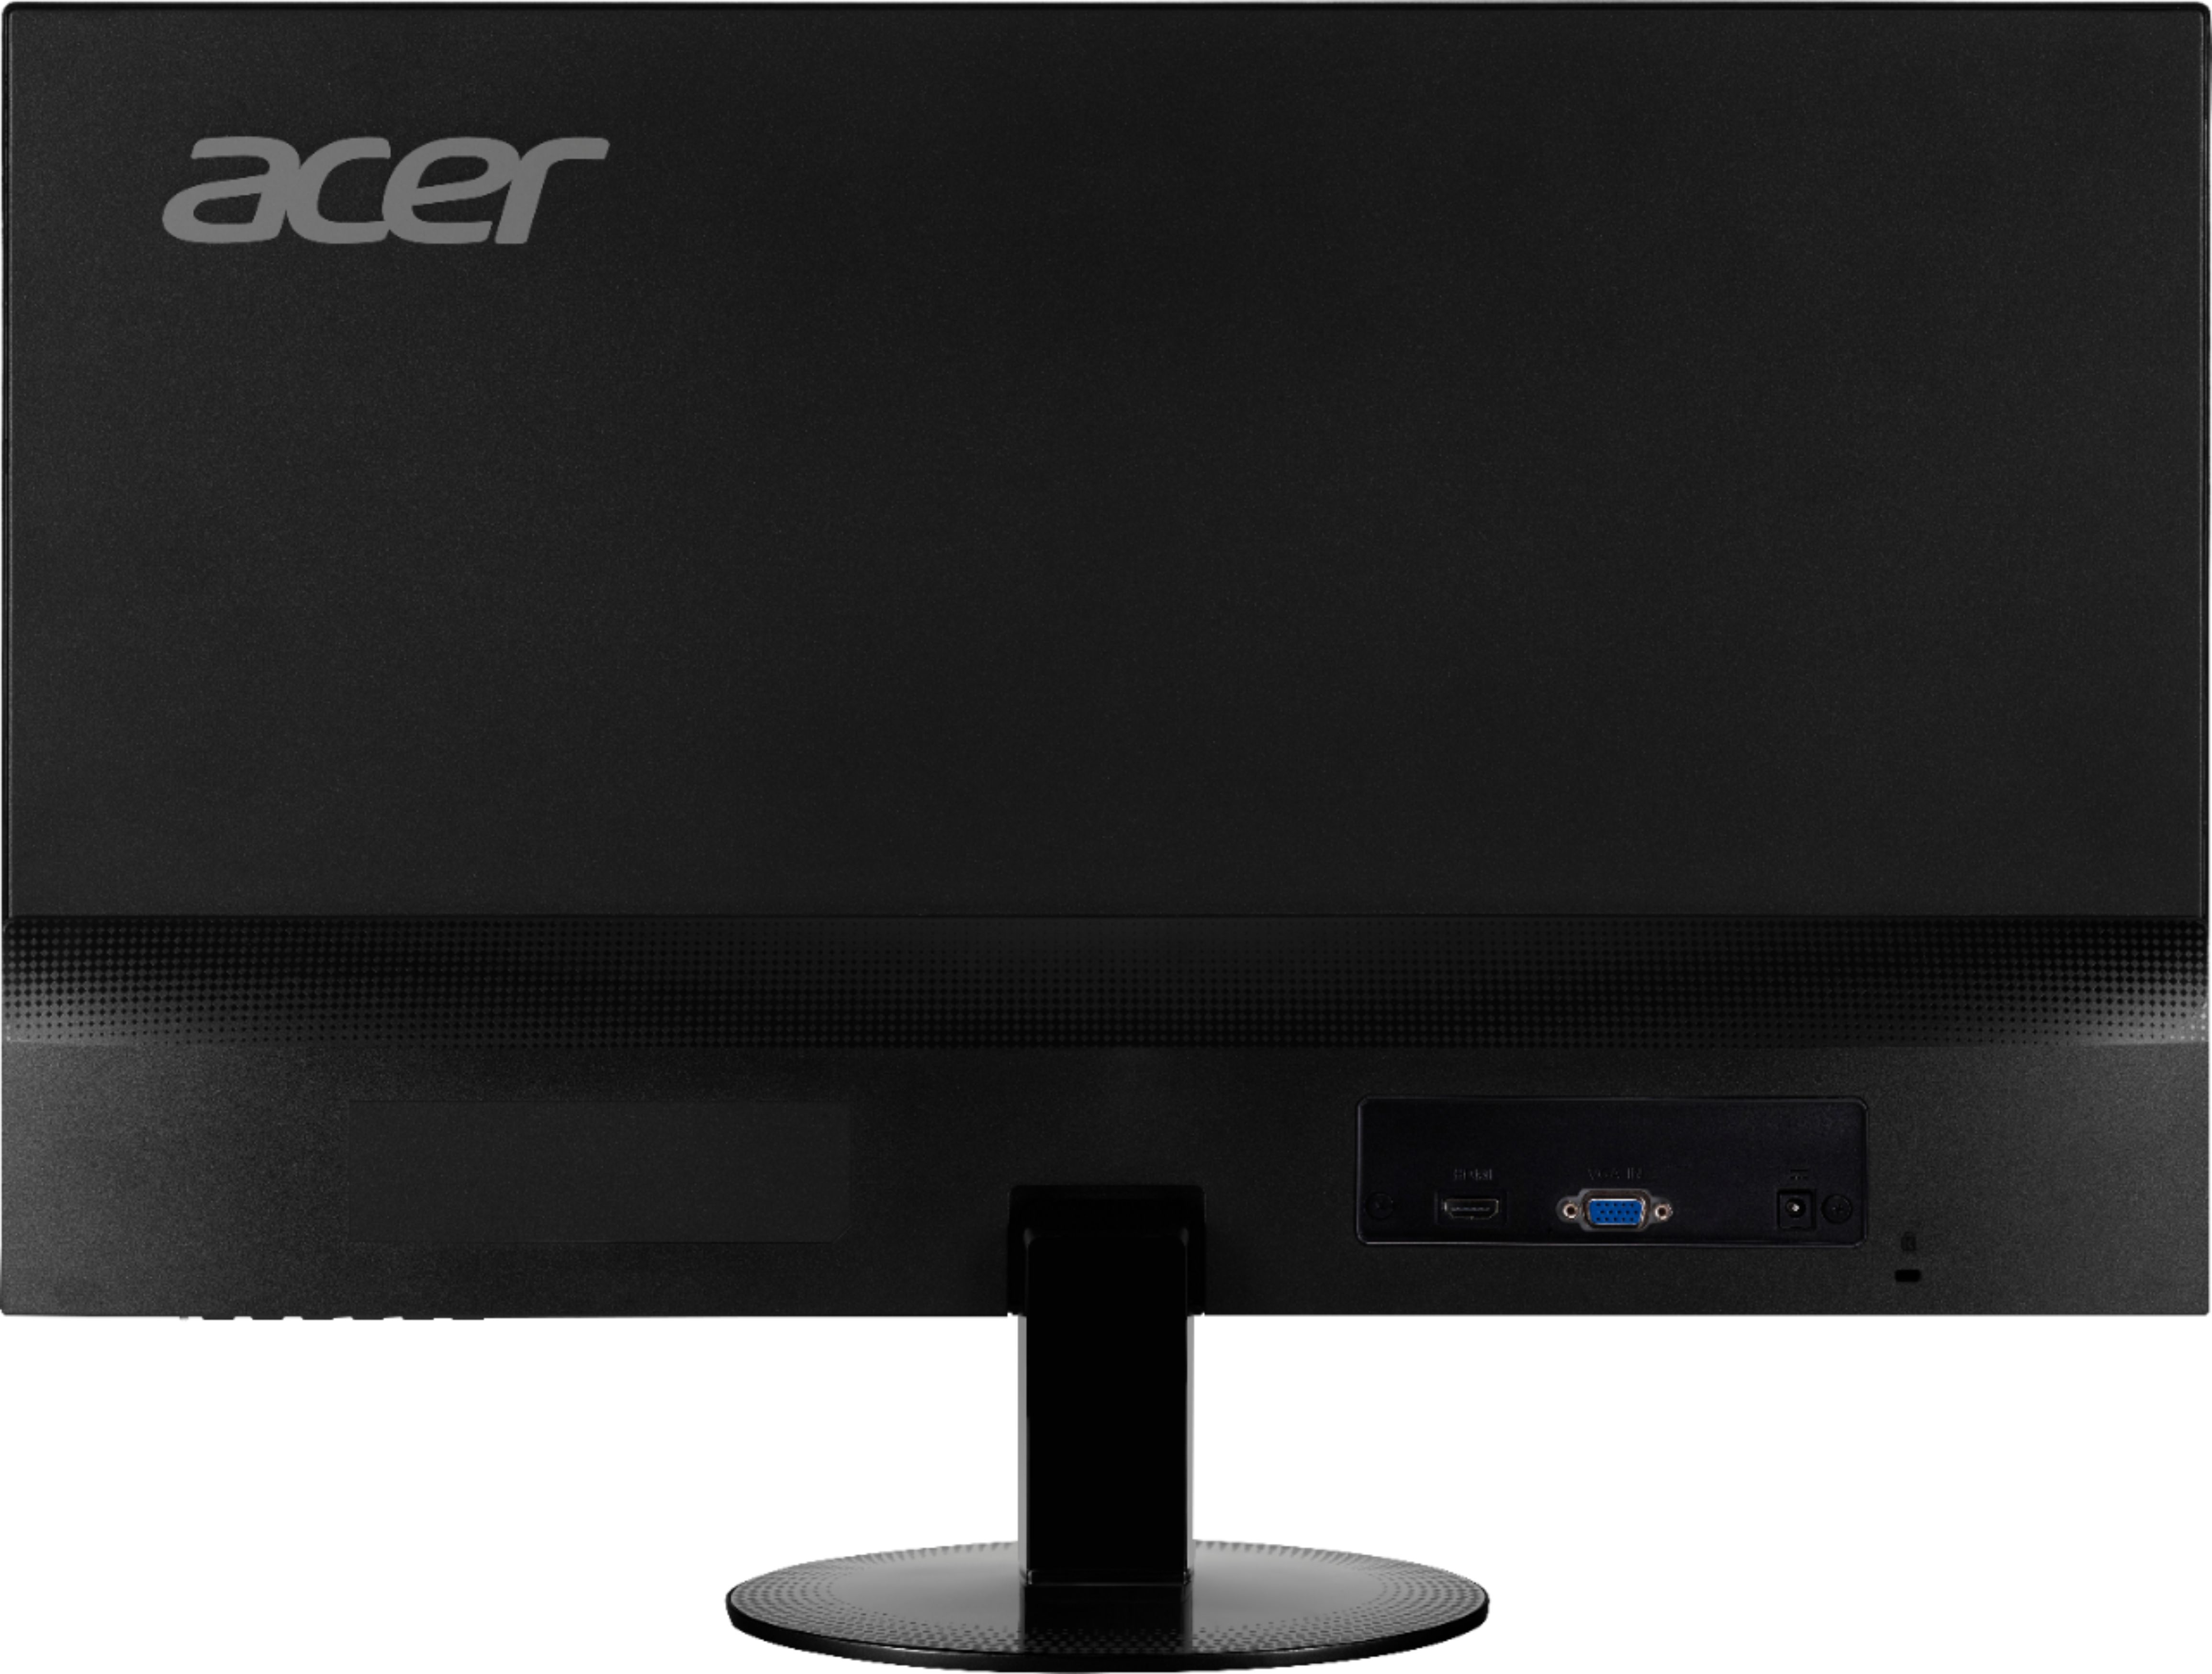 Back View: Acer - Geek Squad Certified Refurbished SA230 23" IPS LED FHD Monitor - Black